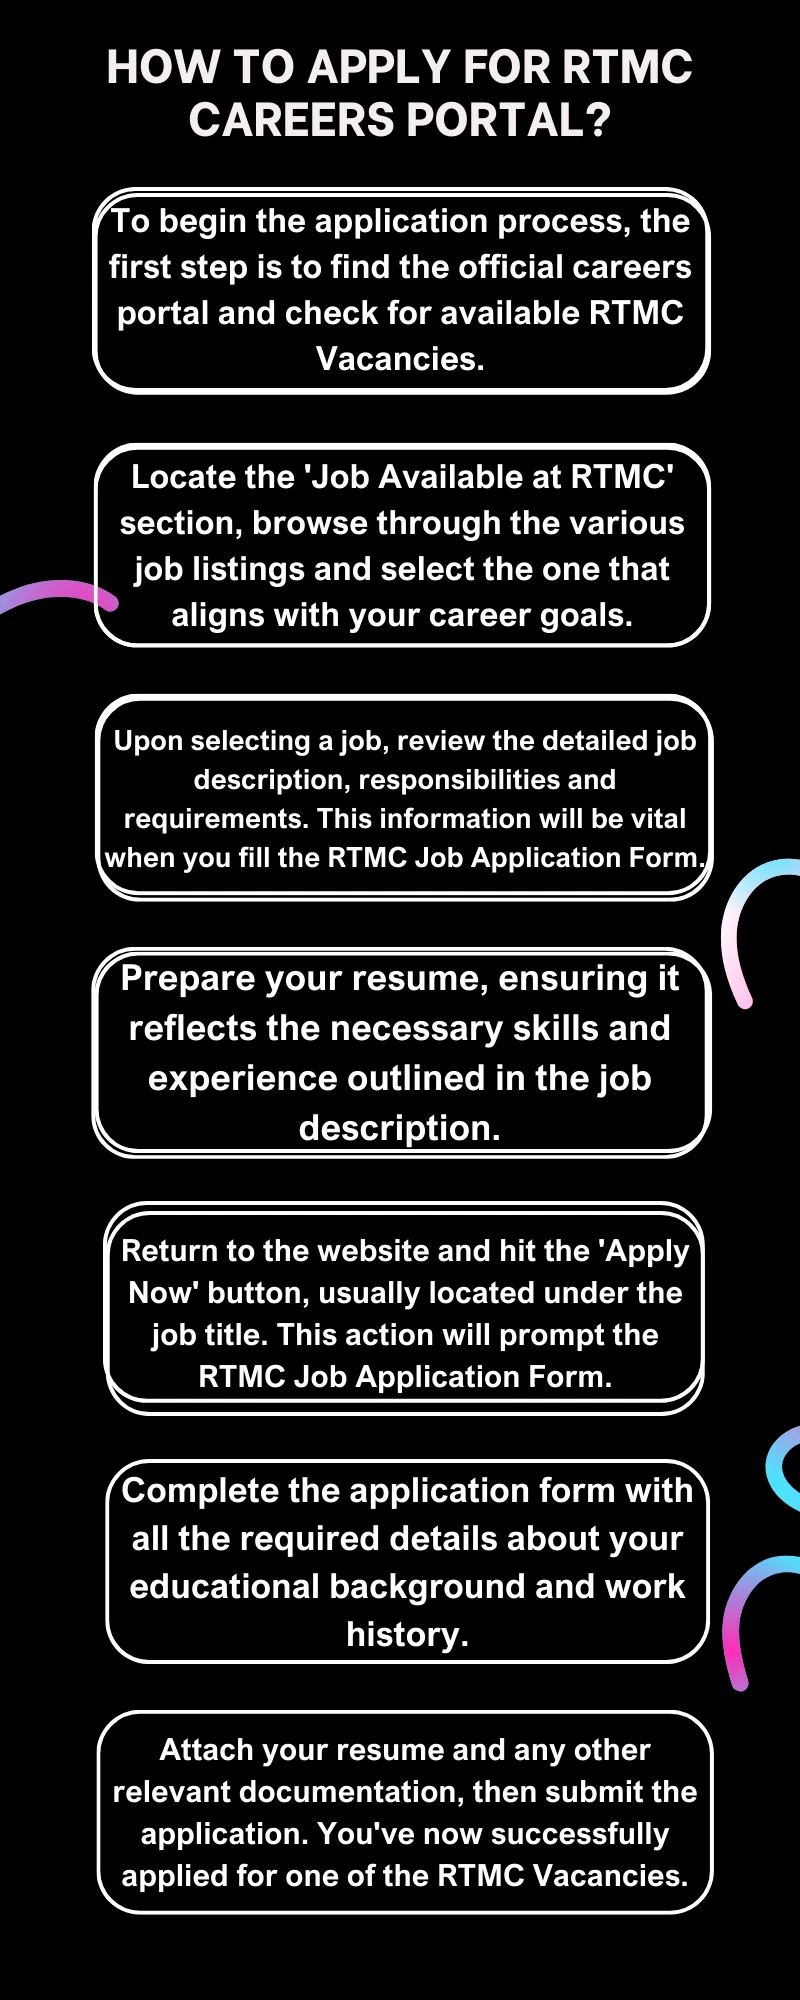 How To Apply for RTMC Careers Portal?